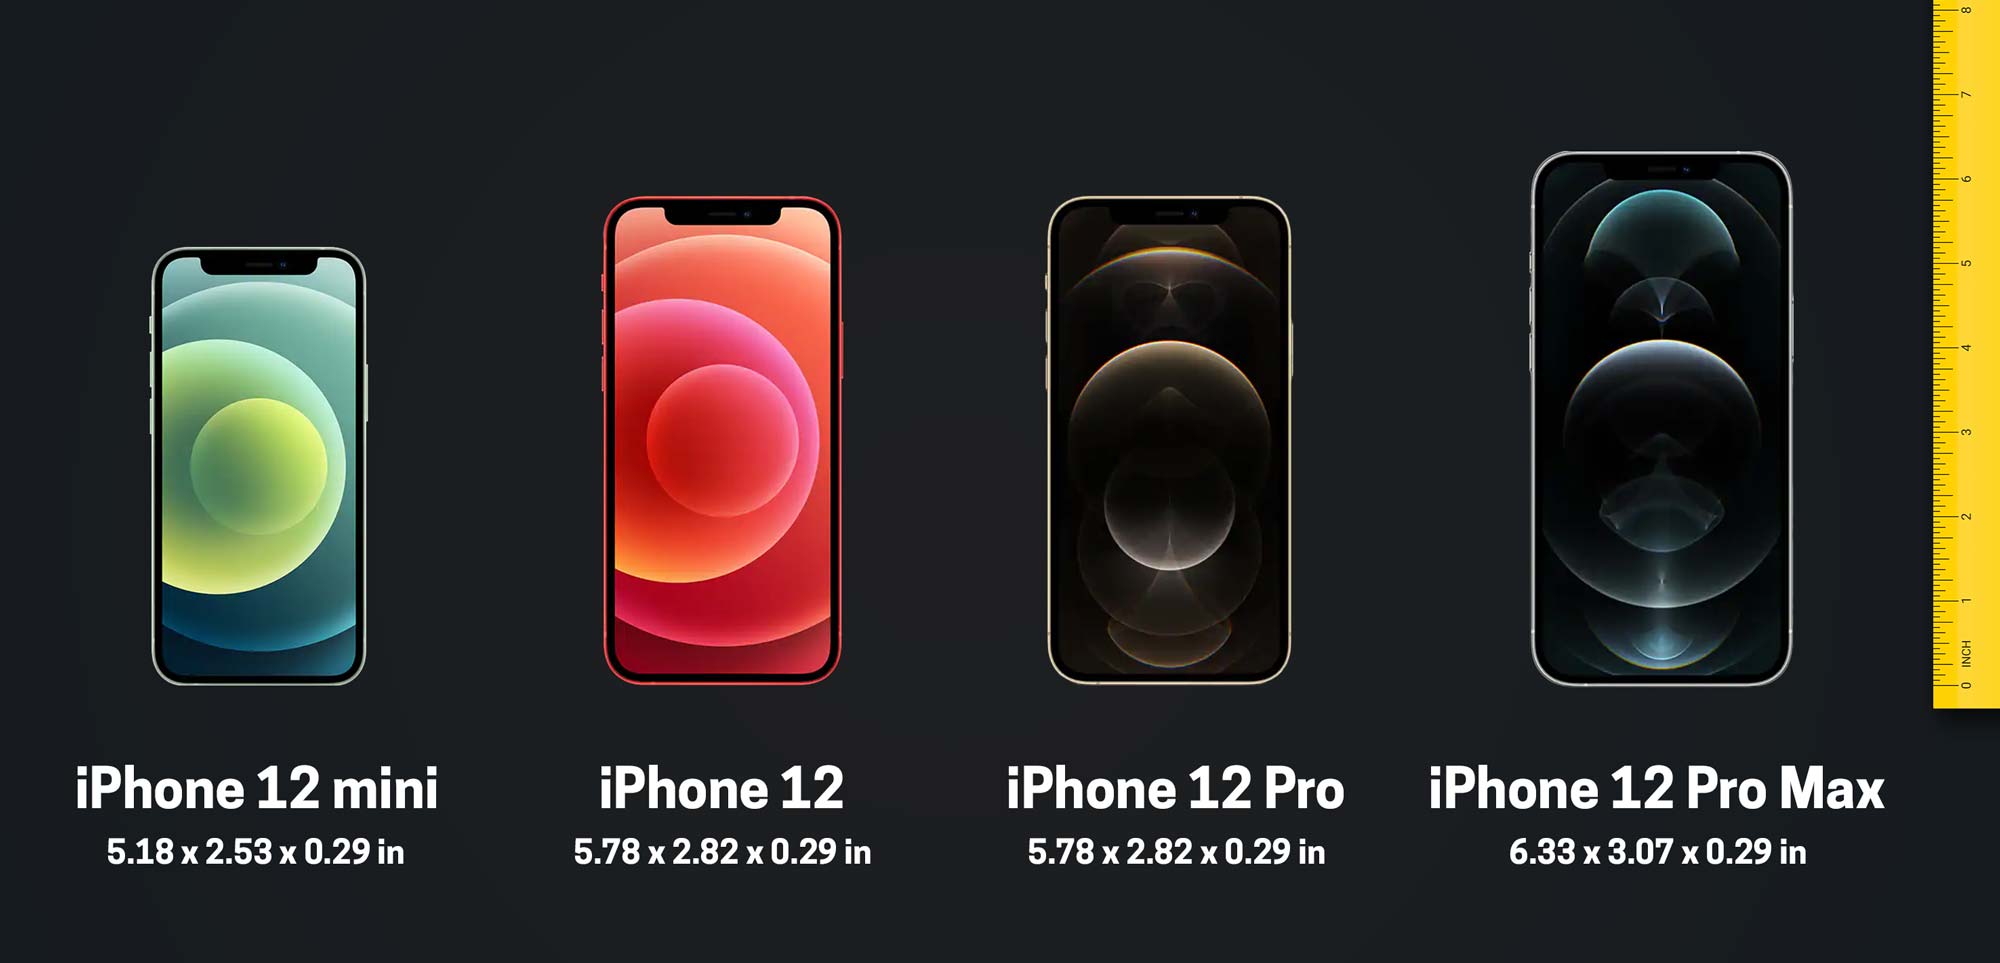 iPhone 12 mini size — here’s how small it truly is | Tom's Guide